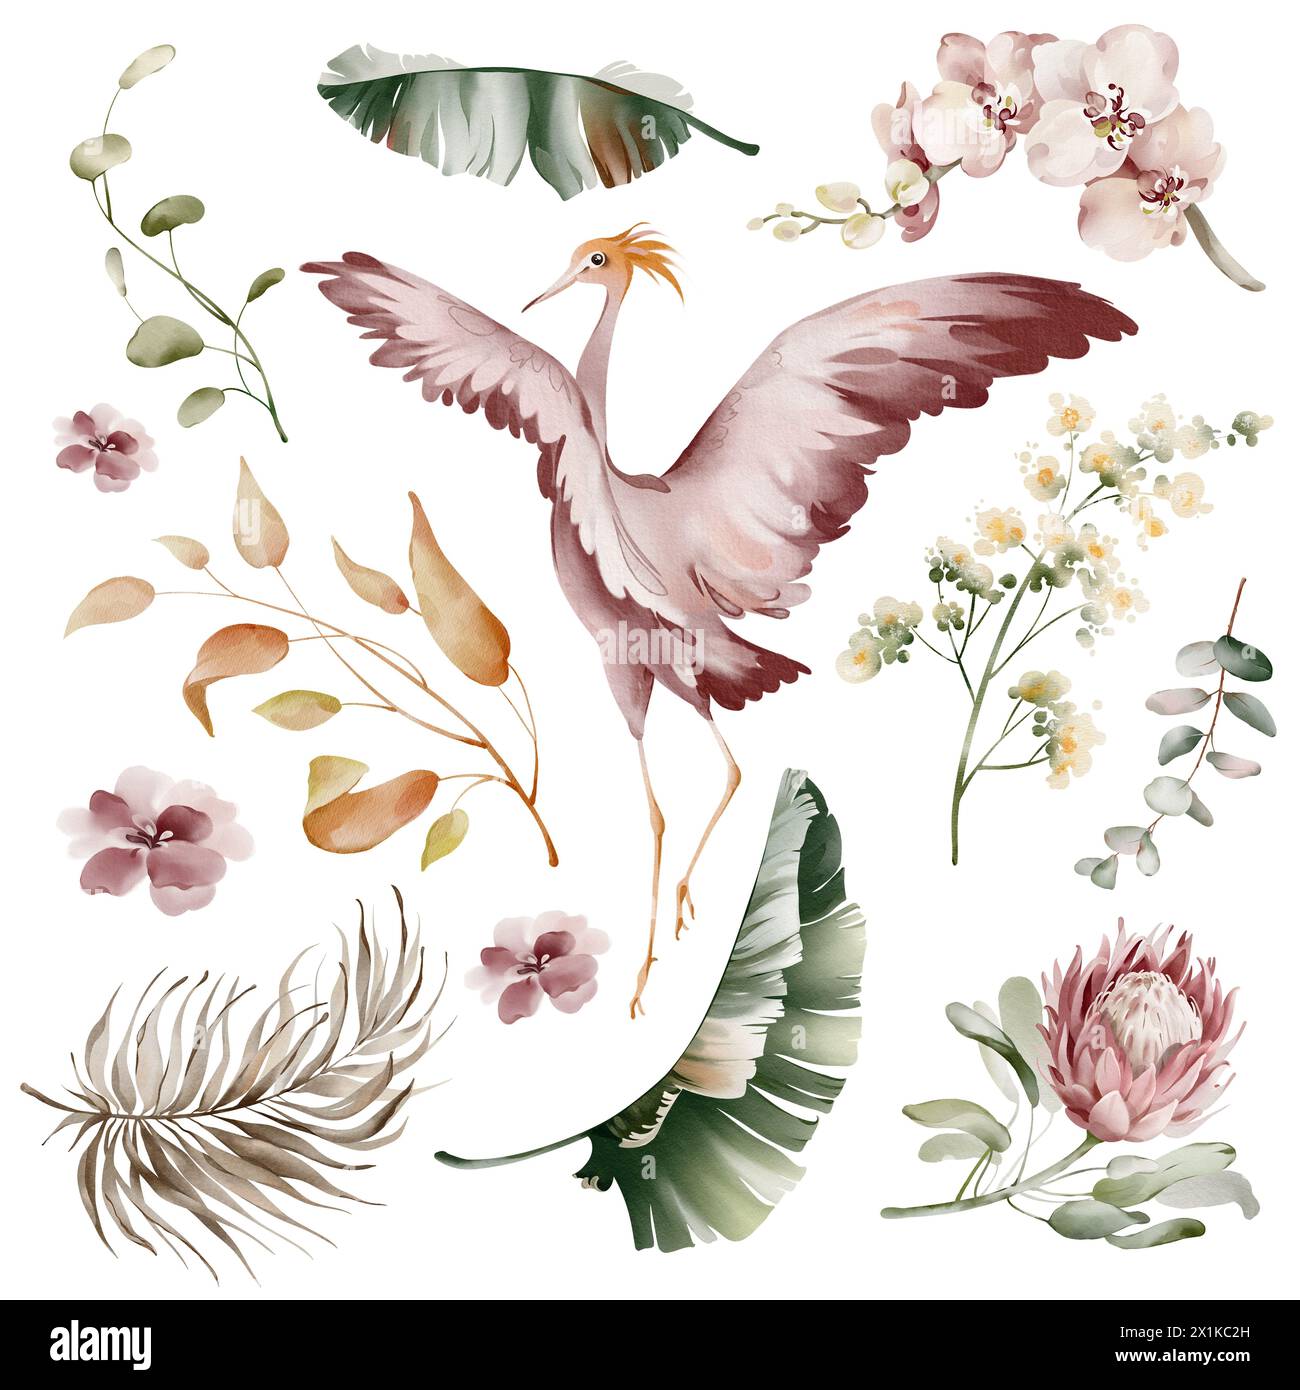 Pink Ibis birds. Watercolor elements of tropical birds, flowers and plants. Banana plants and orchid, Australian flamingo on a white background. Stock Photo